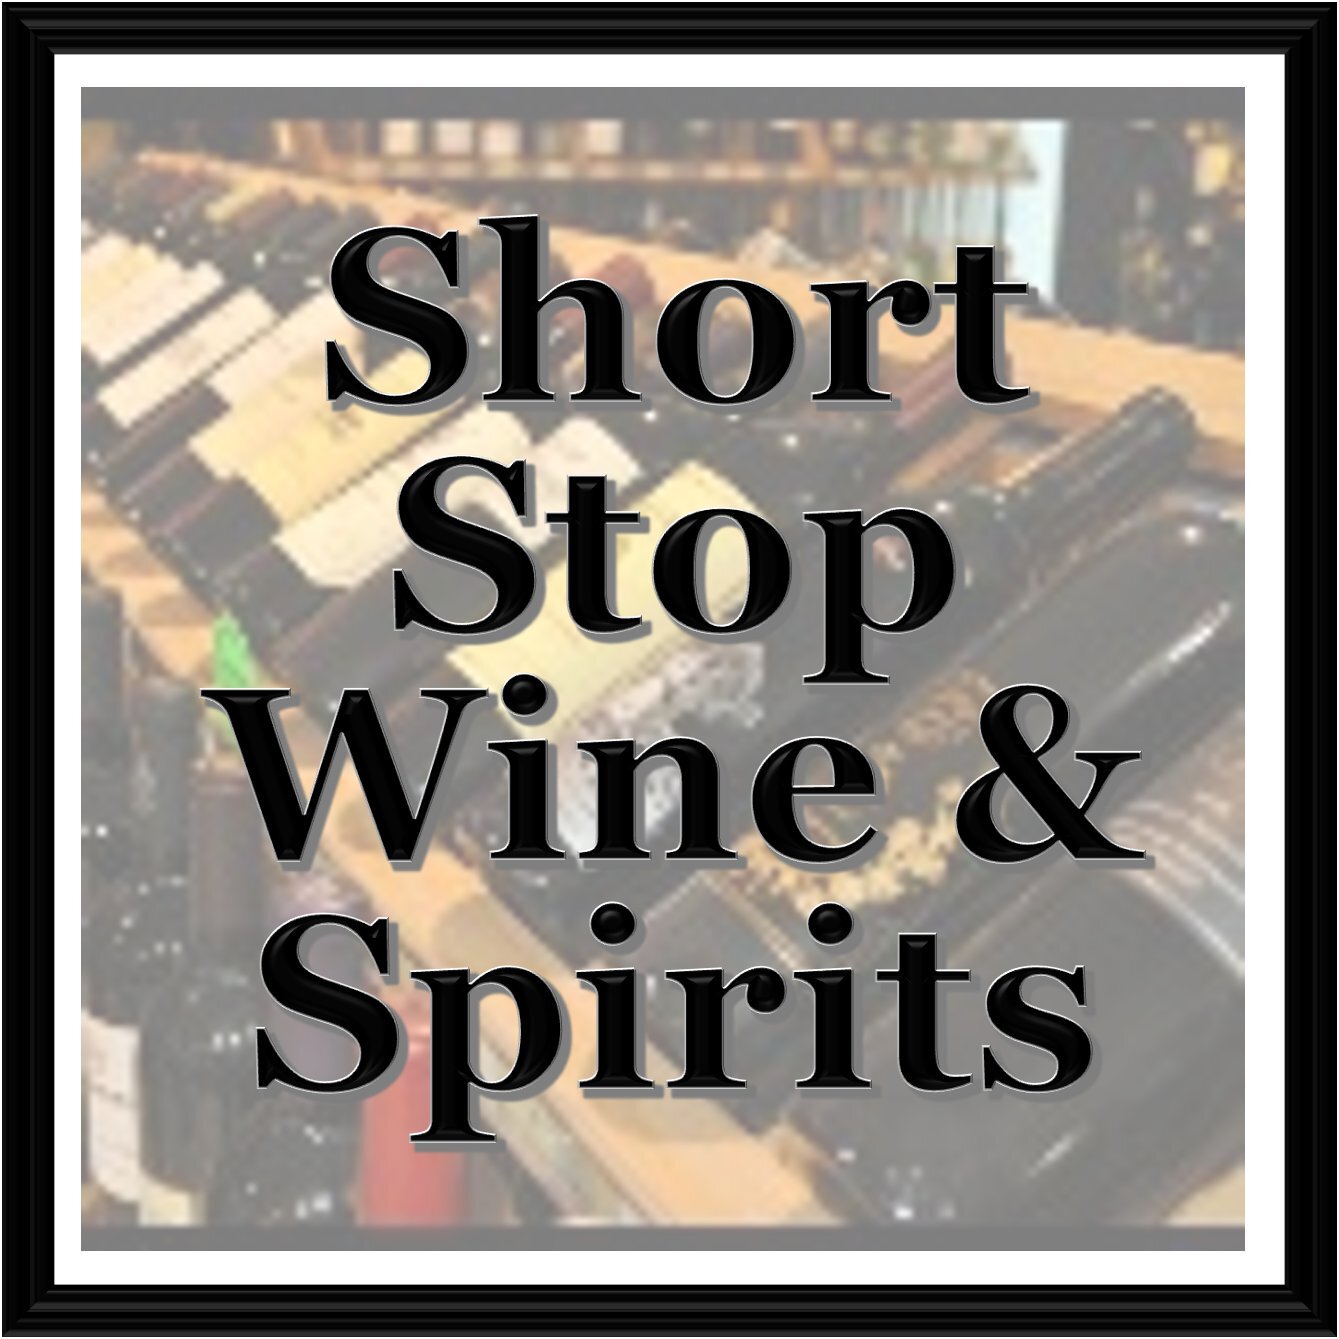 Thanks for supporting our #koins4k9s partners! For KOINS FOR K9s Month, we are recognizing our fantastic community box hosts. Today, we thank Short Stop Wine &amp; Spirits. They are great annual supporters, and we appreciate their partnership. Be sur